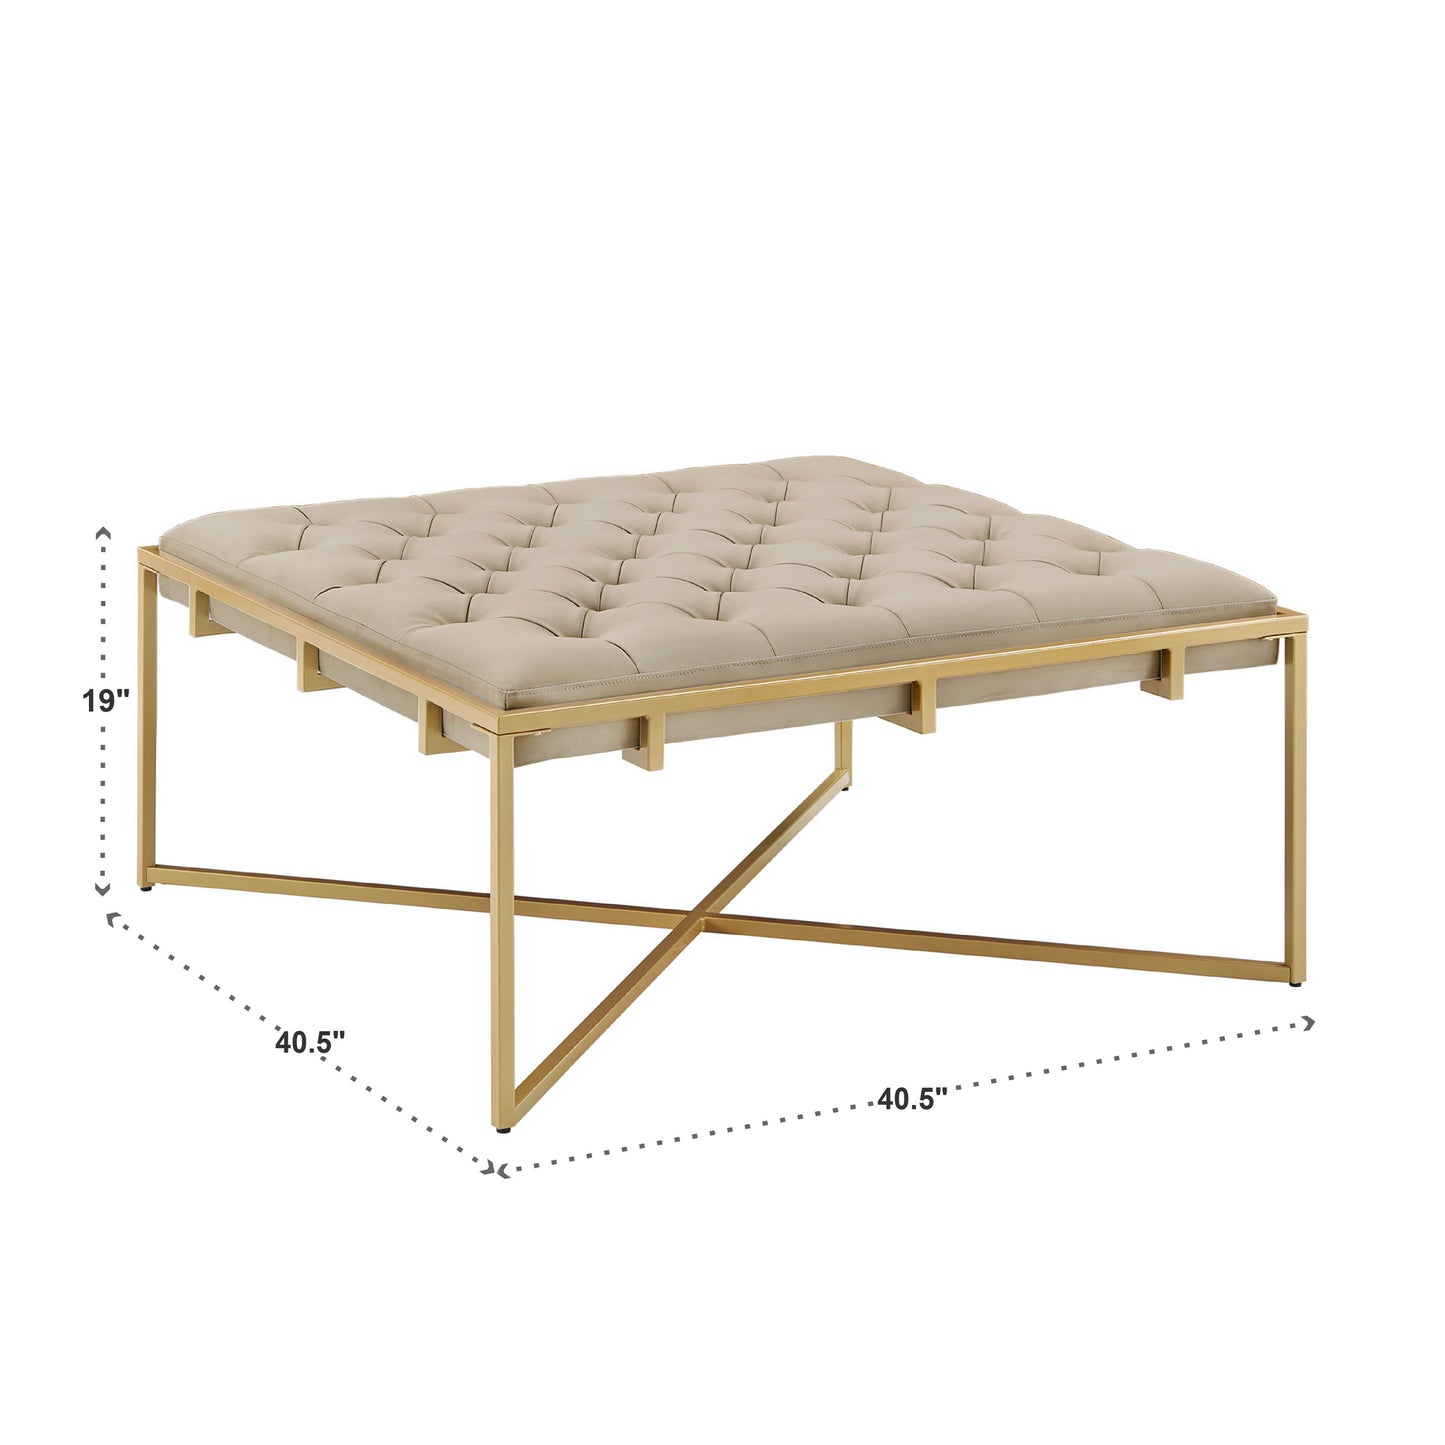 Faux Leather Tufted Square Ottoman - Beige